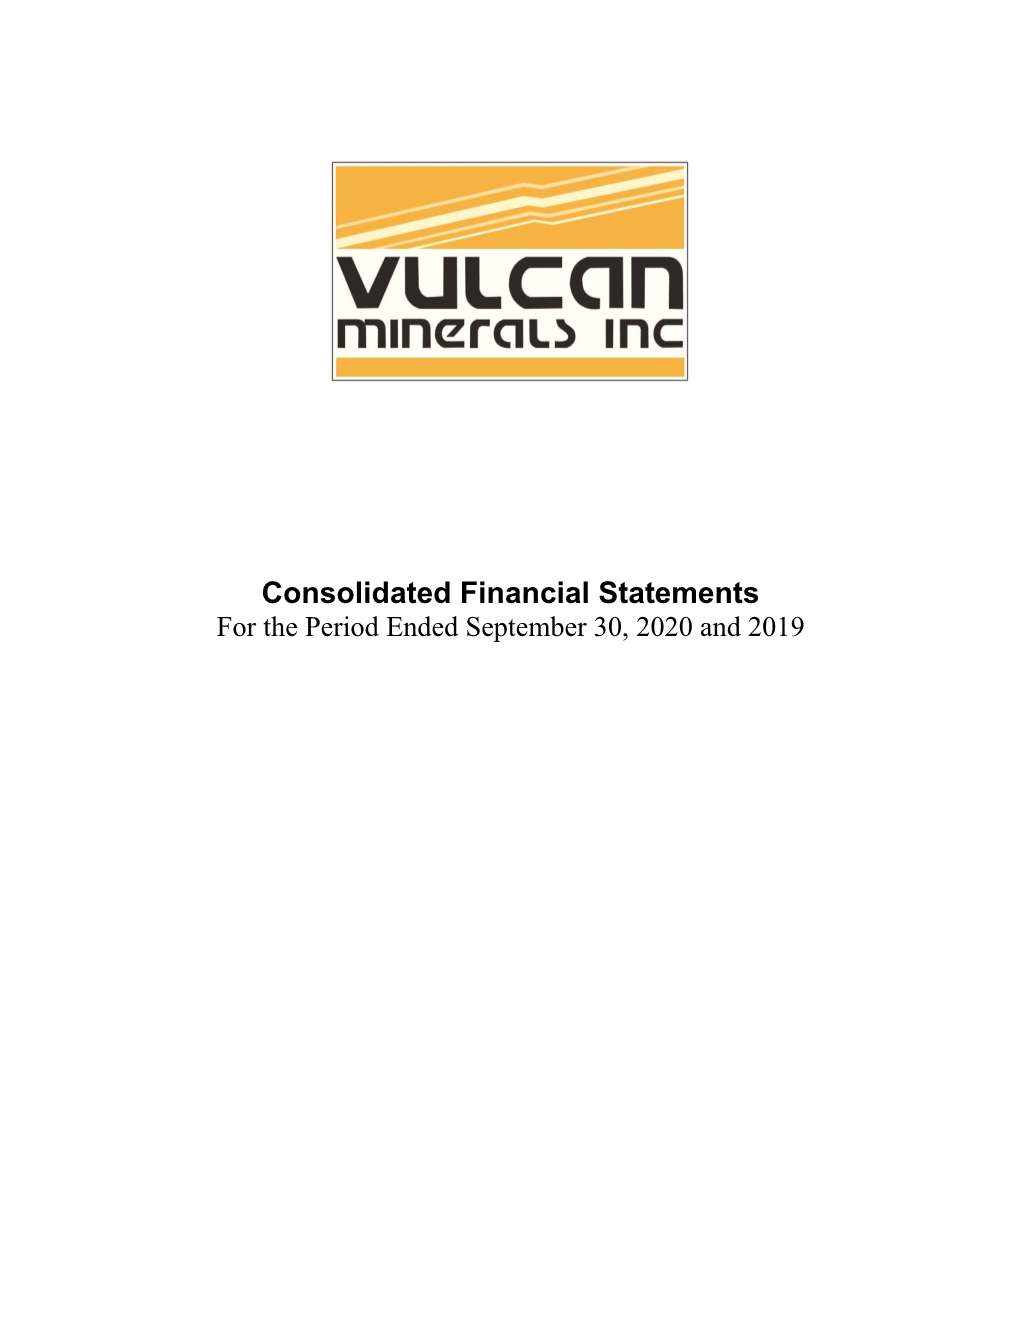 Consolidated Financial Statements for the Period Ended September 30, 2020 and 2019 Notice of No Auditor Review of Interim Financial Statements